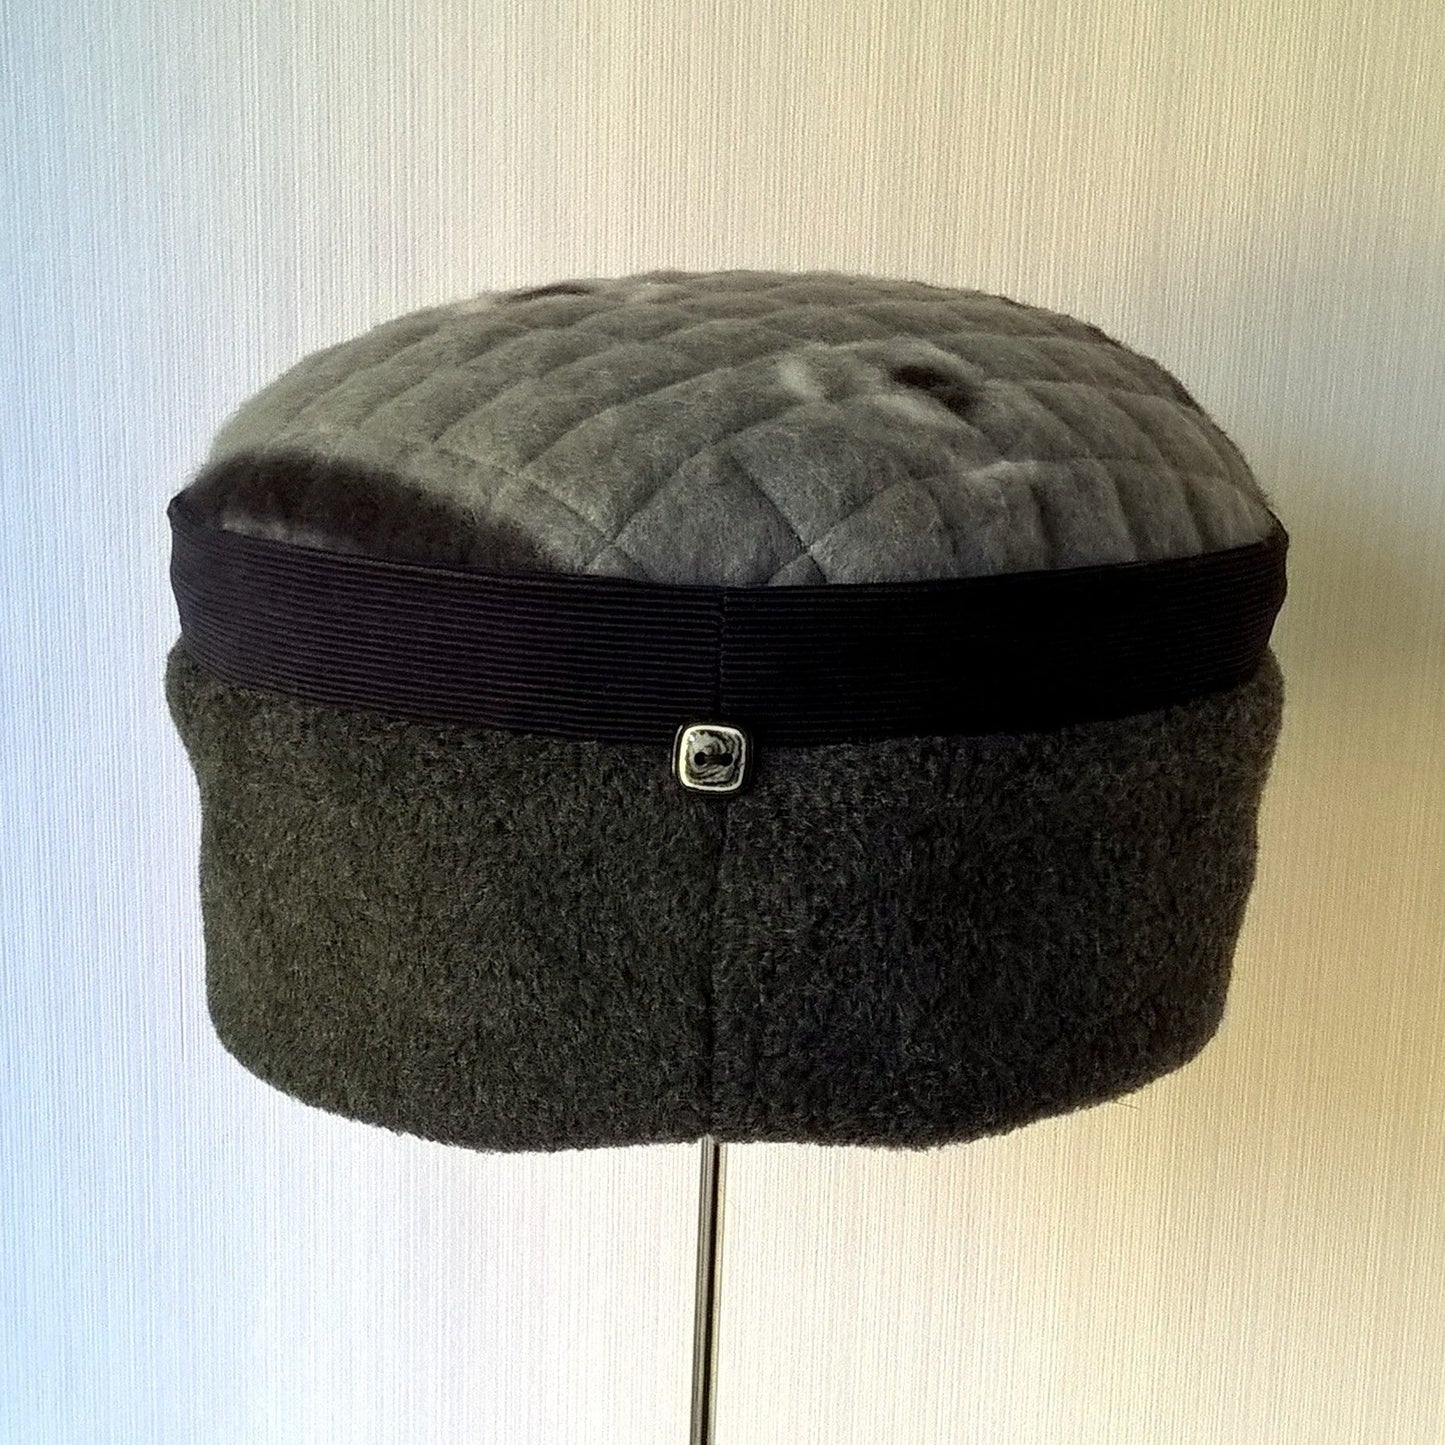 Grey fleece hat with navy corduroy trim and button detail at the back